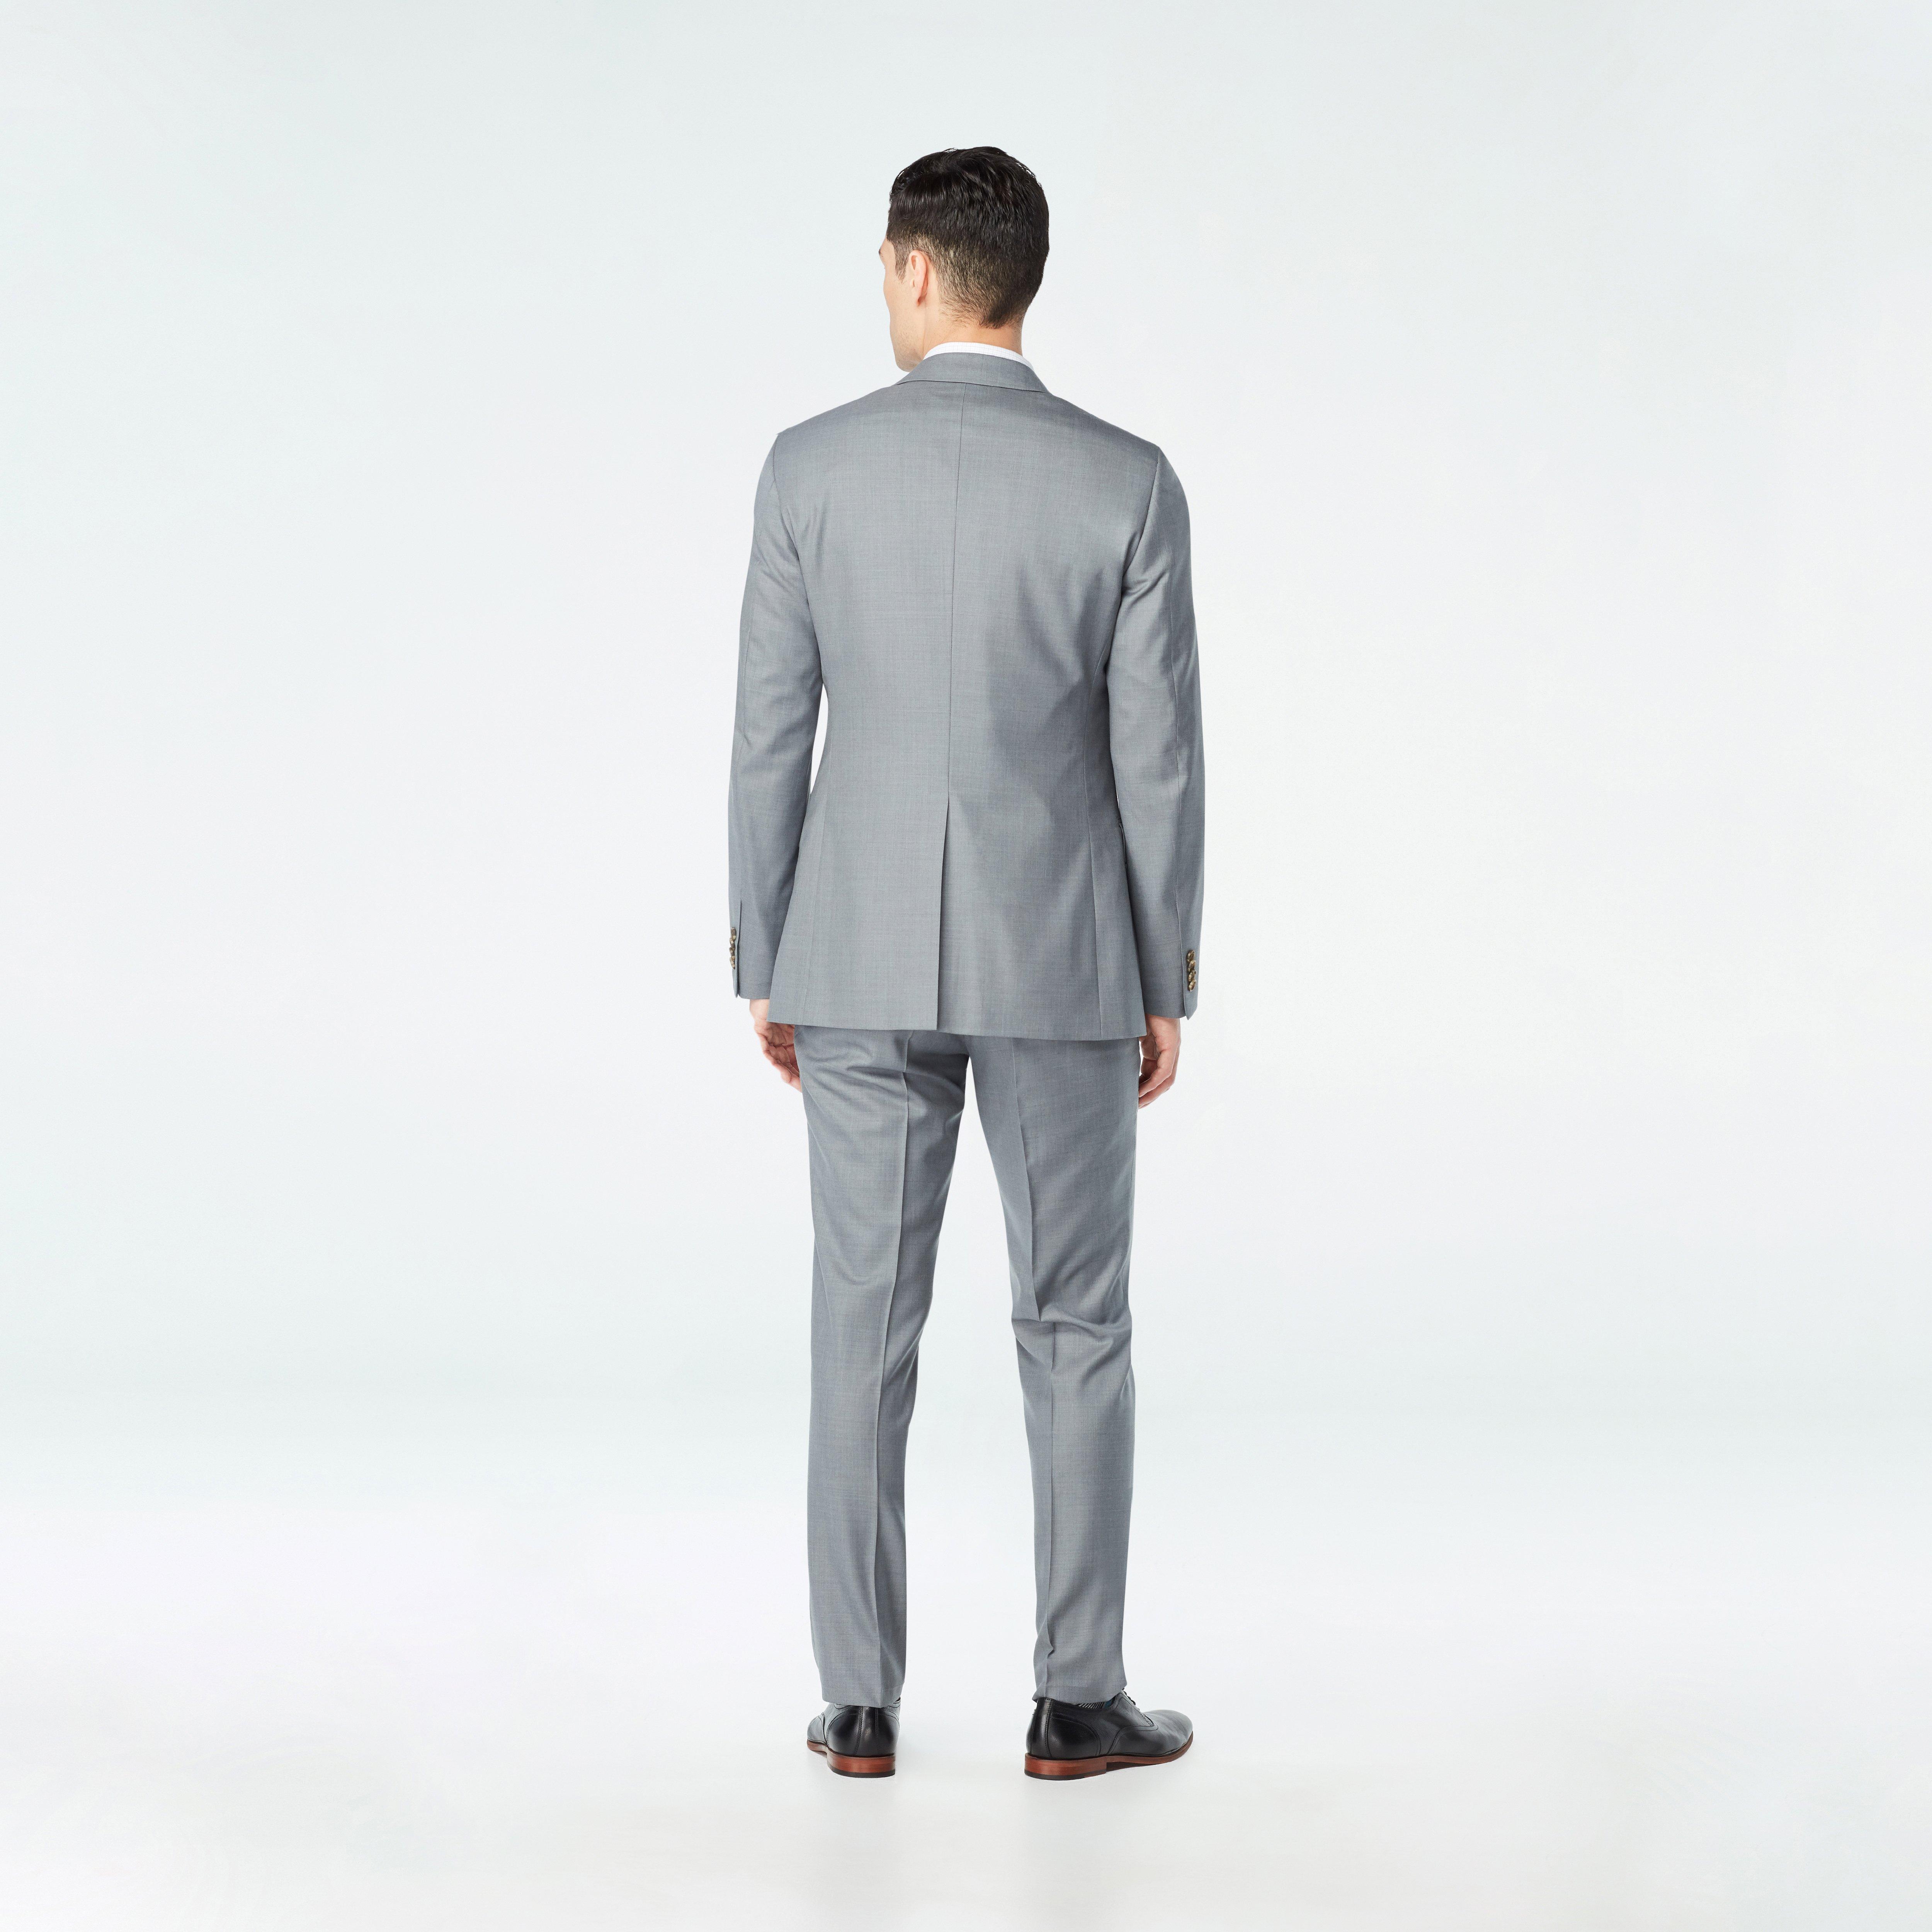 Custom Suits Made For You - Highbridge Light Gray Suit | INDOCHINO